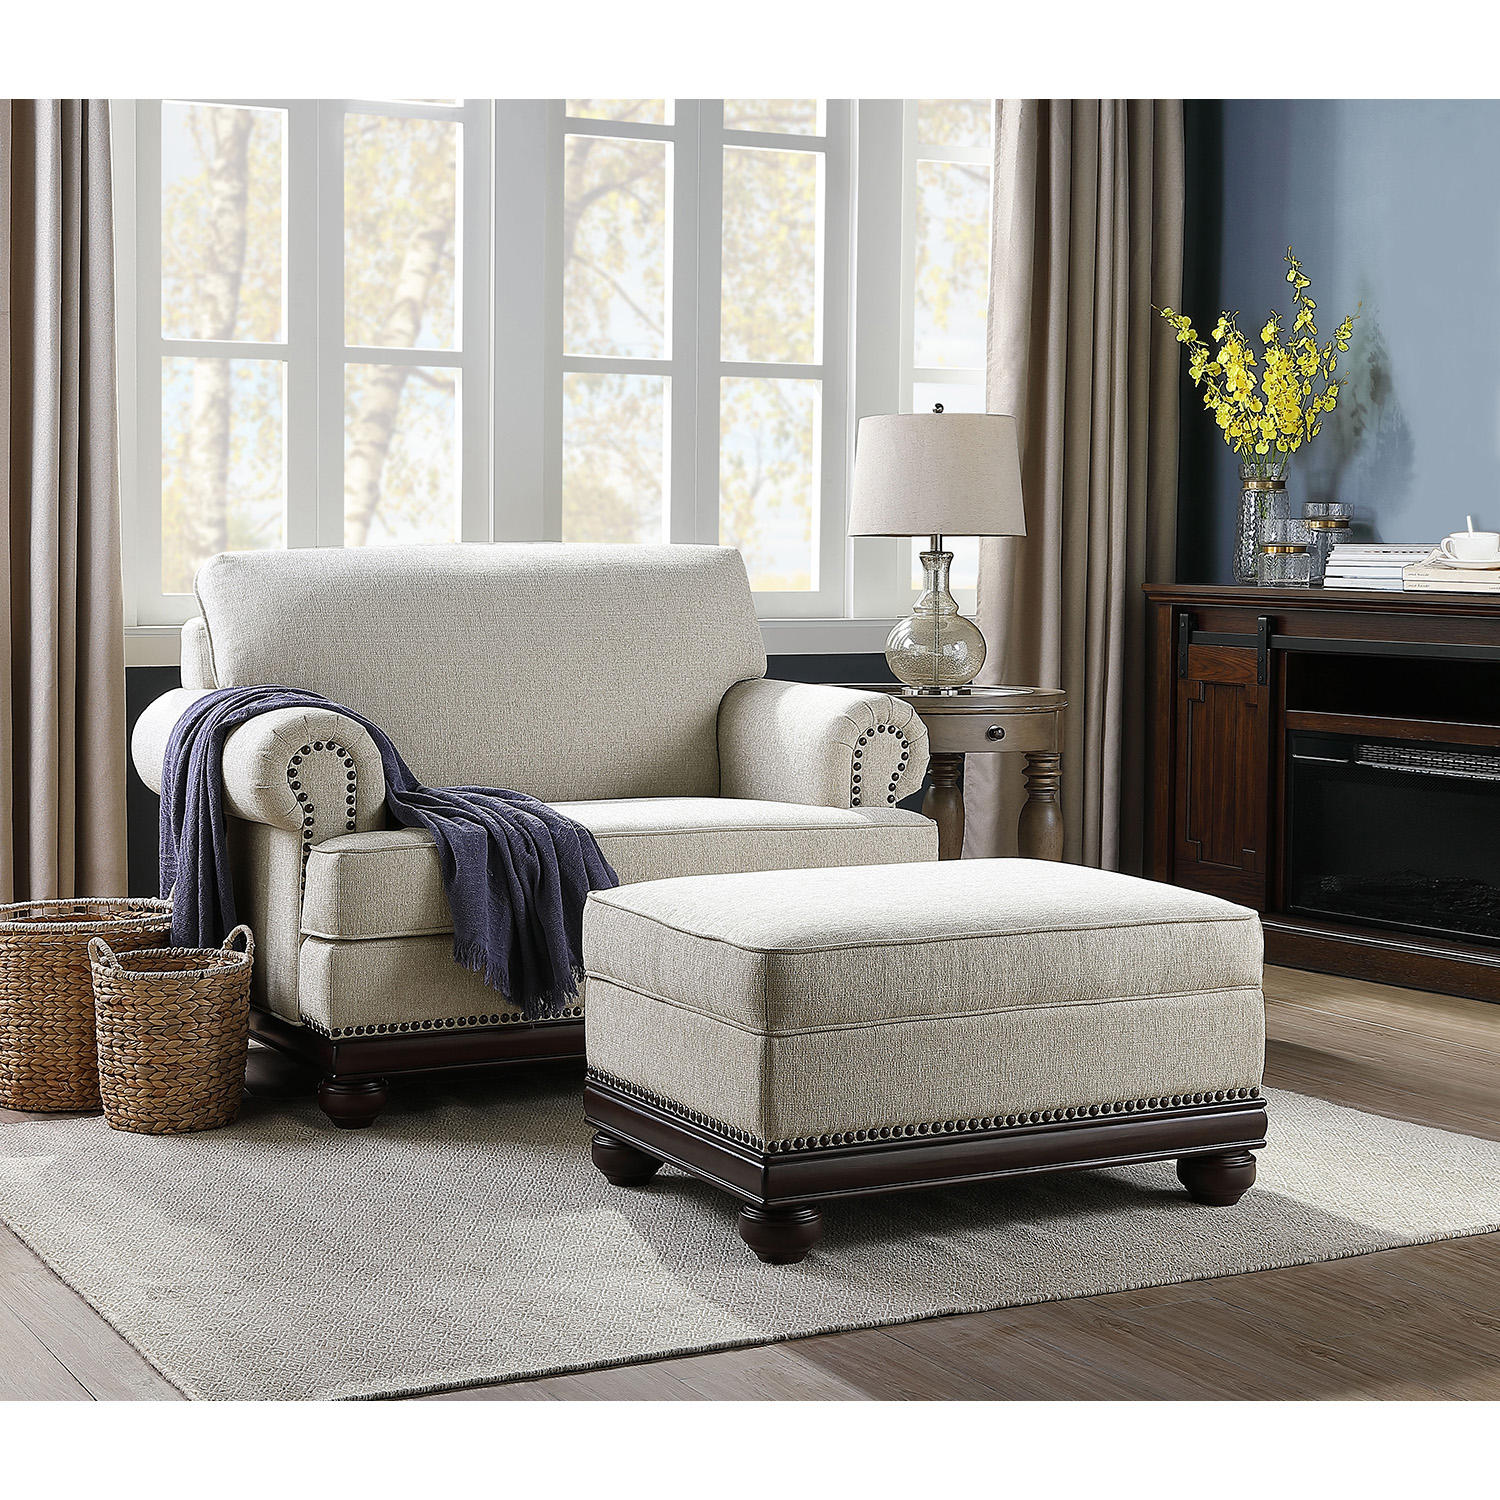 Member’s Mark Grayson Oversized Chair and Storage Ottoman